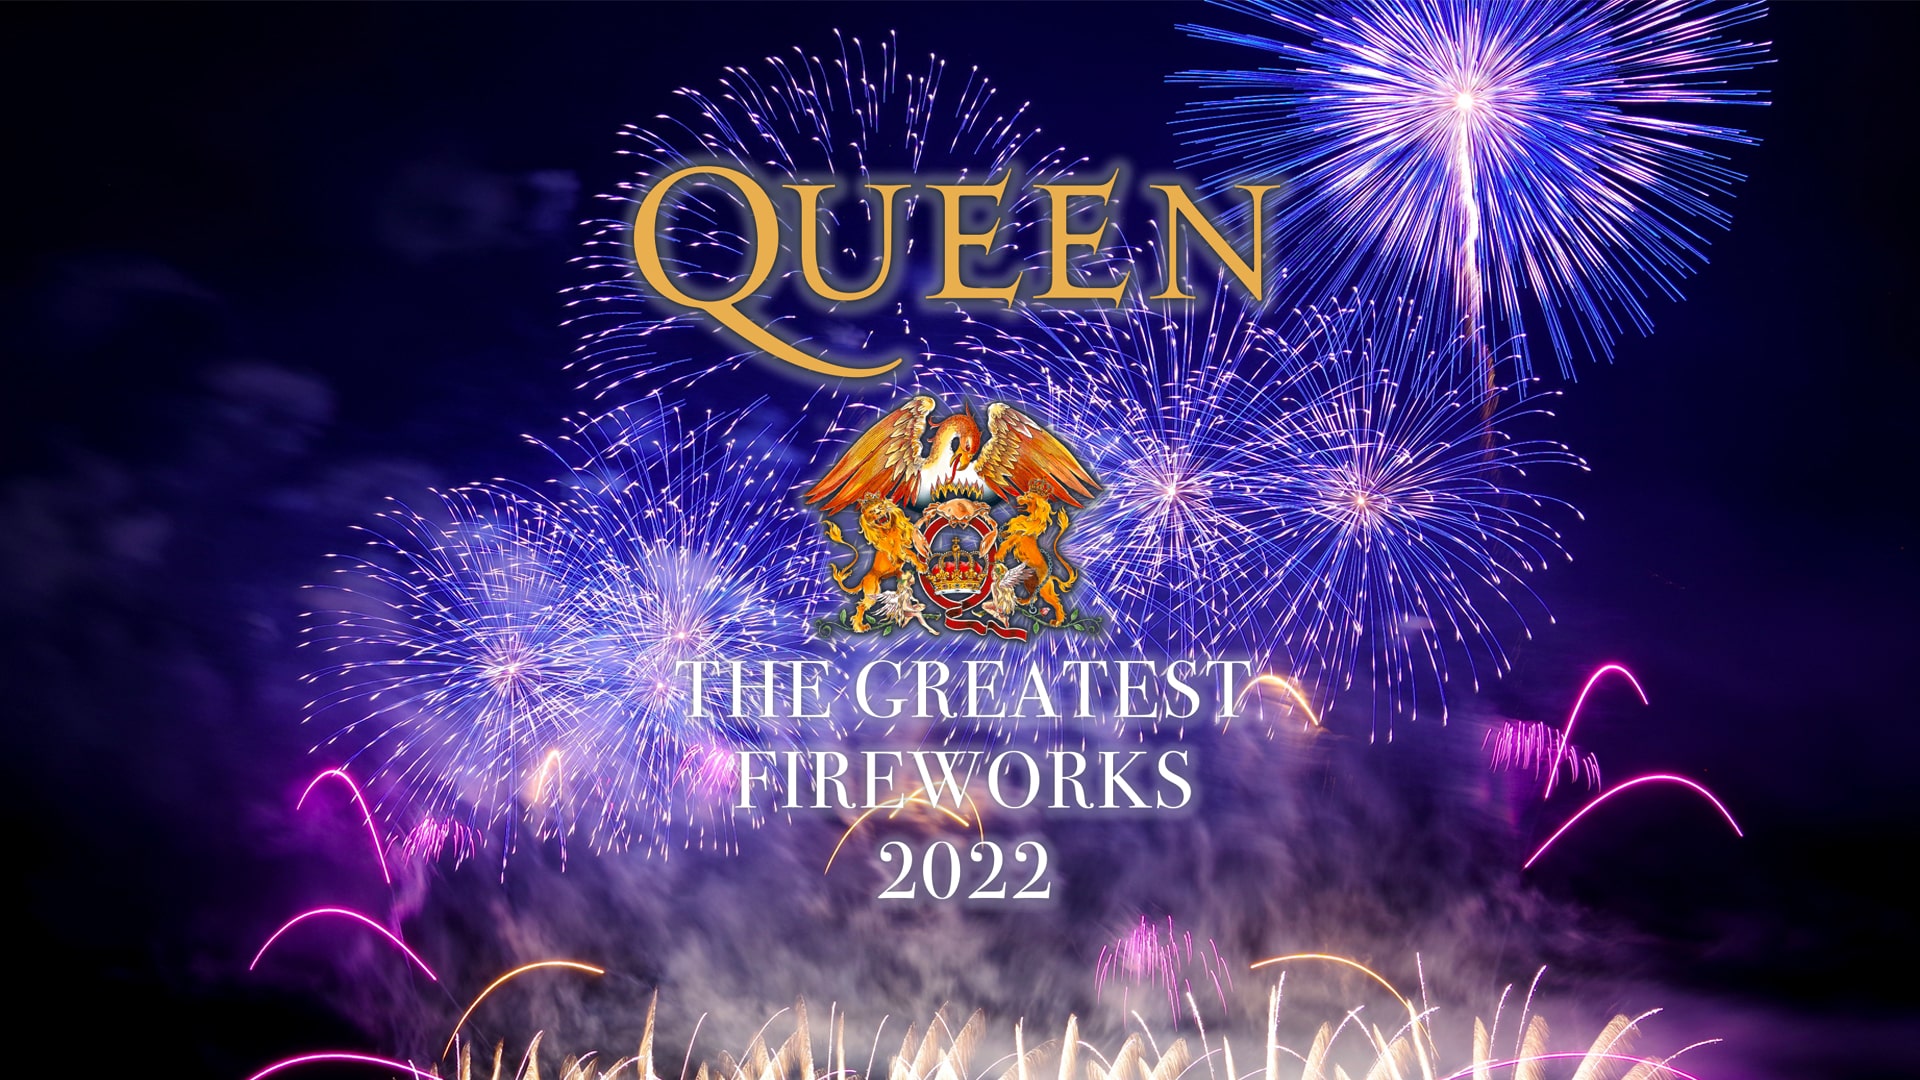 SUGOI花火「QUEEN THE GREATEST FIREWORKS 2022」のグッズが登場！|グッズ